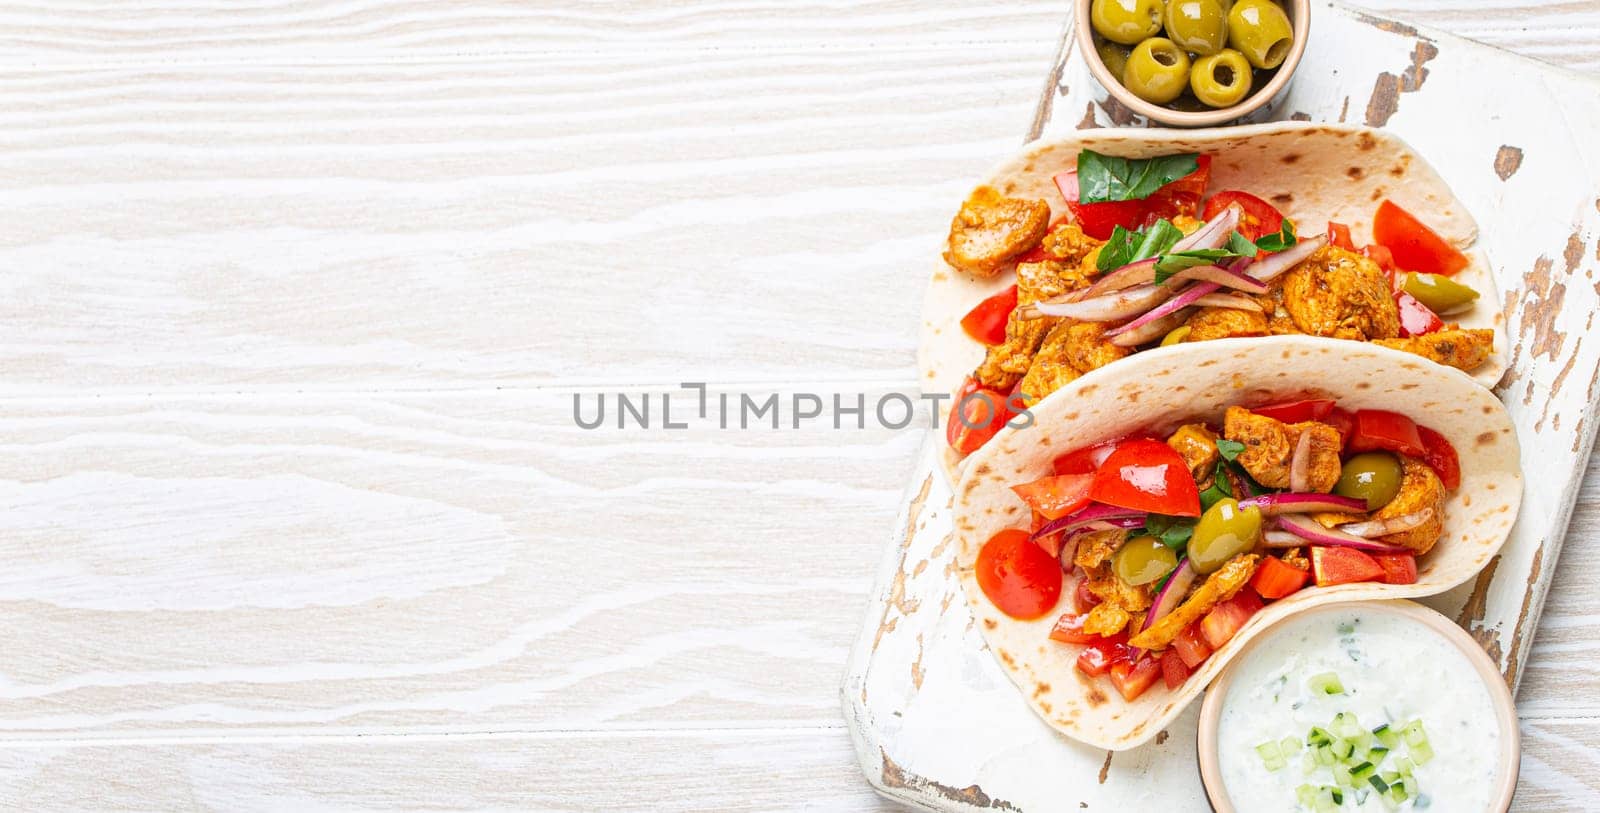 Traditional Greek Dish Gyros: Pita bread Wraps with vegetables, meat, herbs, olives on rustic wooden cutting board with Tzatziki sauce, olive oil top view on white wooden background, space for text.